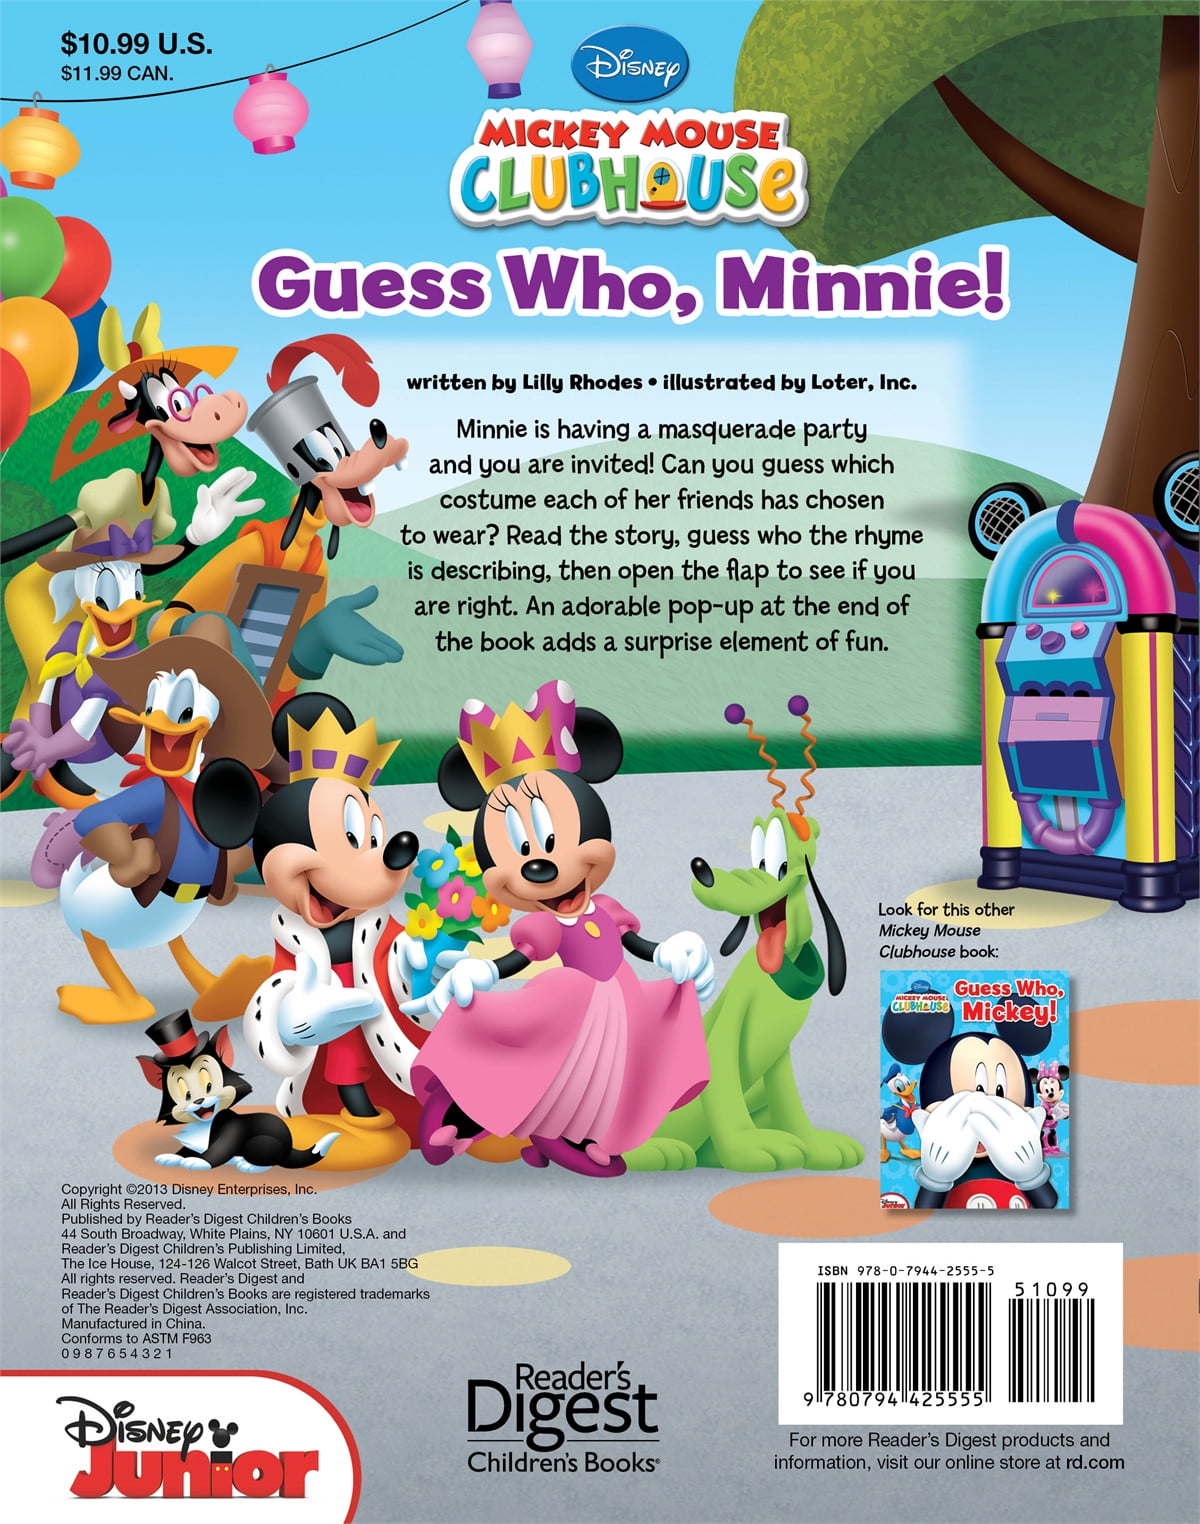 Disney Mickey Mouse Clubhouse Guess Who, Minnie! (Book 1